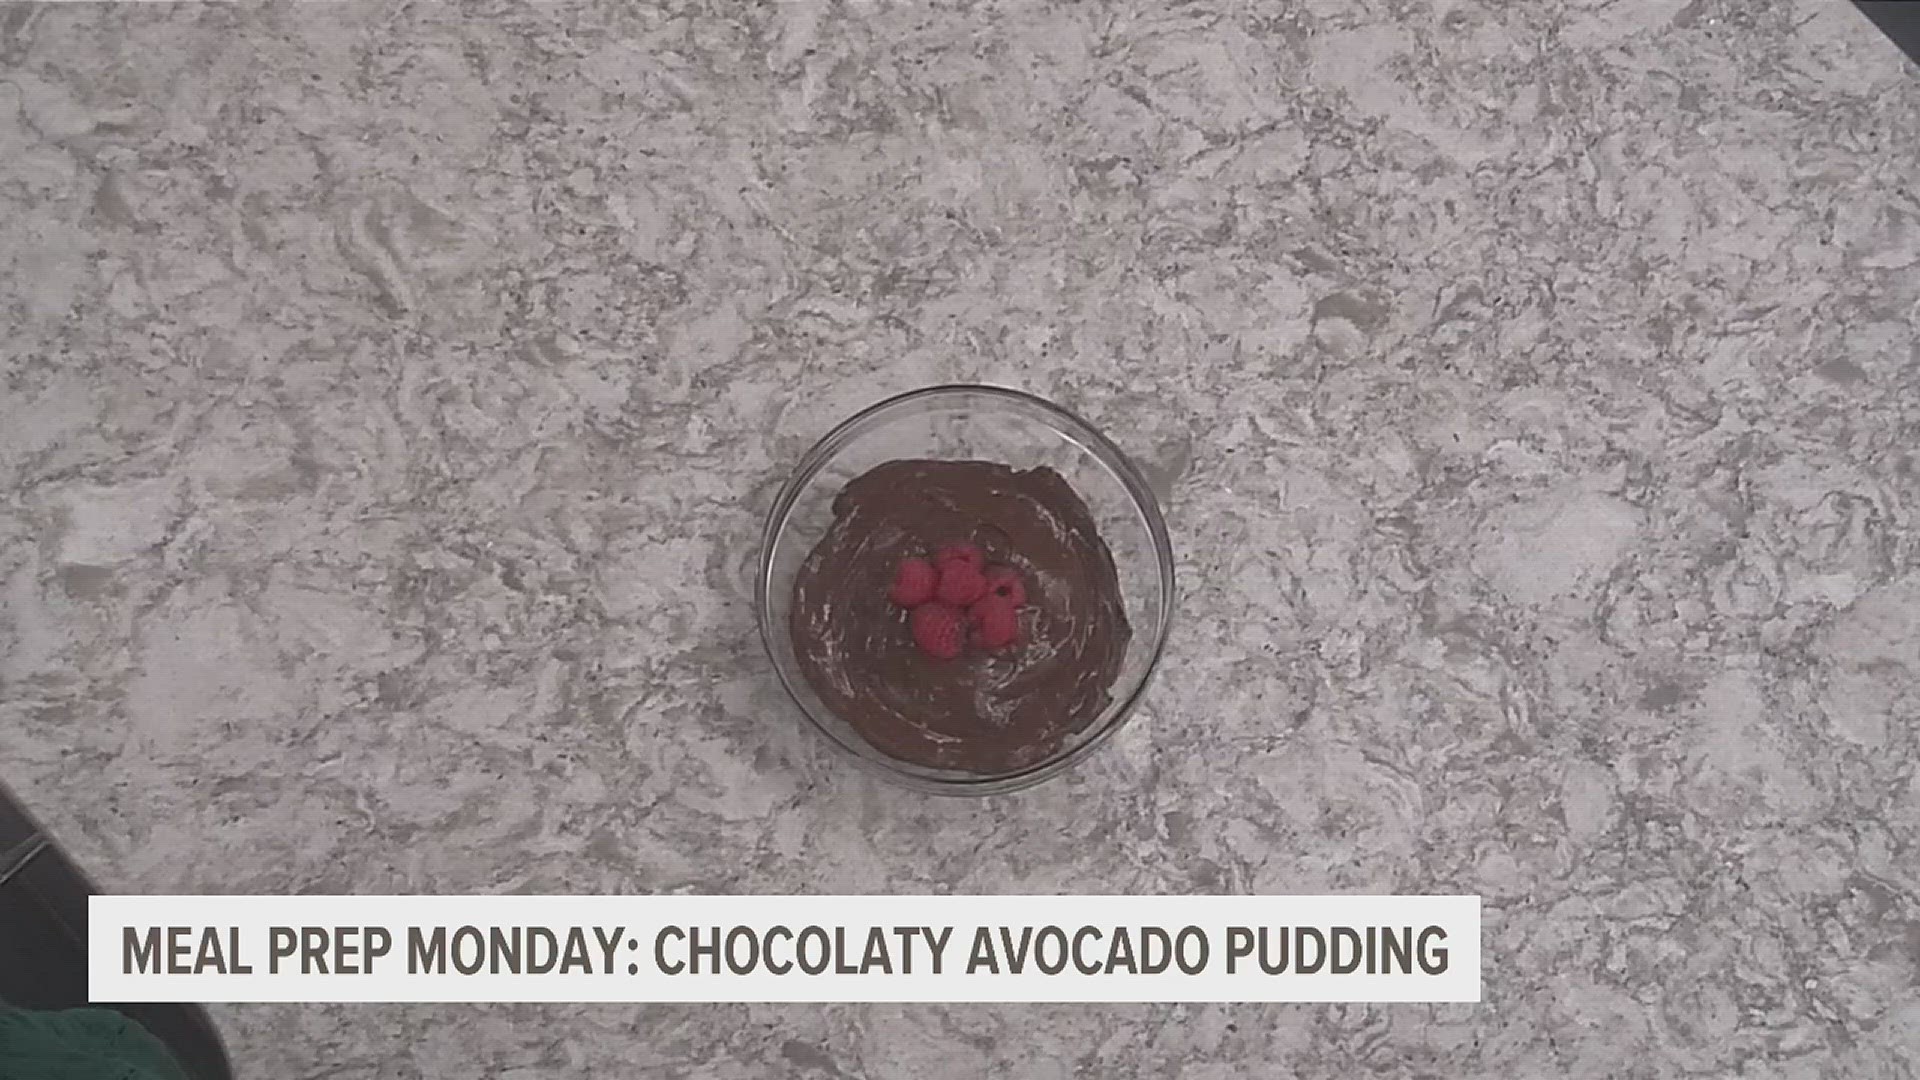 Ditch the milk and cream with this smooth chocolate avocado-based pudding. It's so rich in chocolate flavor, you won't notice the avocados.